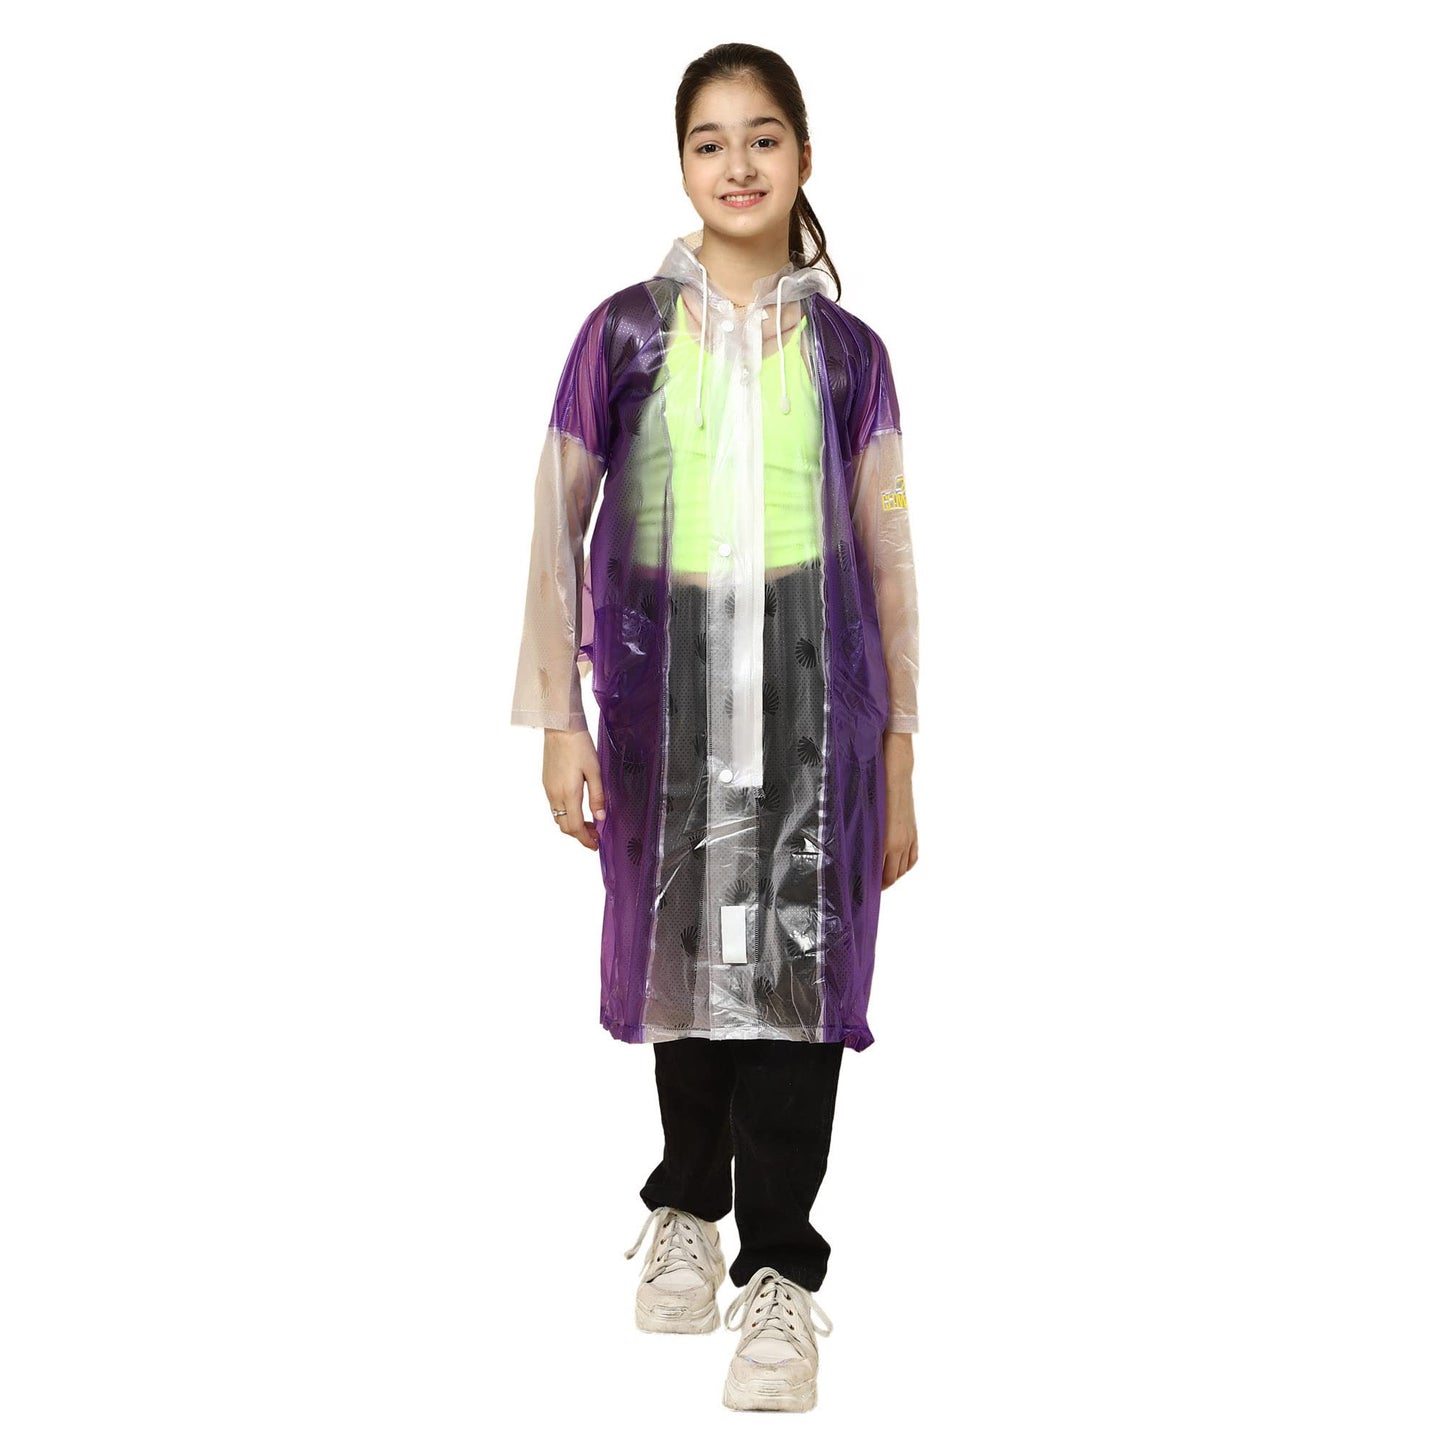 THE CLOWNFISH Laurel Series Kids Waterproof PVC Longcoat with Adjustable Hood & Extra Space for Backpack/Schoolbag Holding. Printed Plastic Pouch. Kid Age-4-5 years (Size-27-Purple)